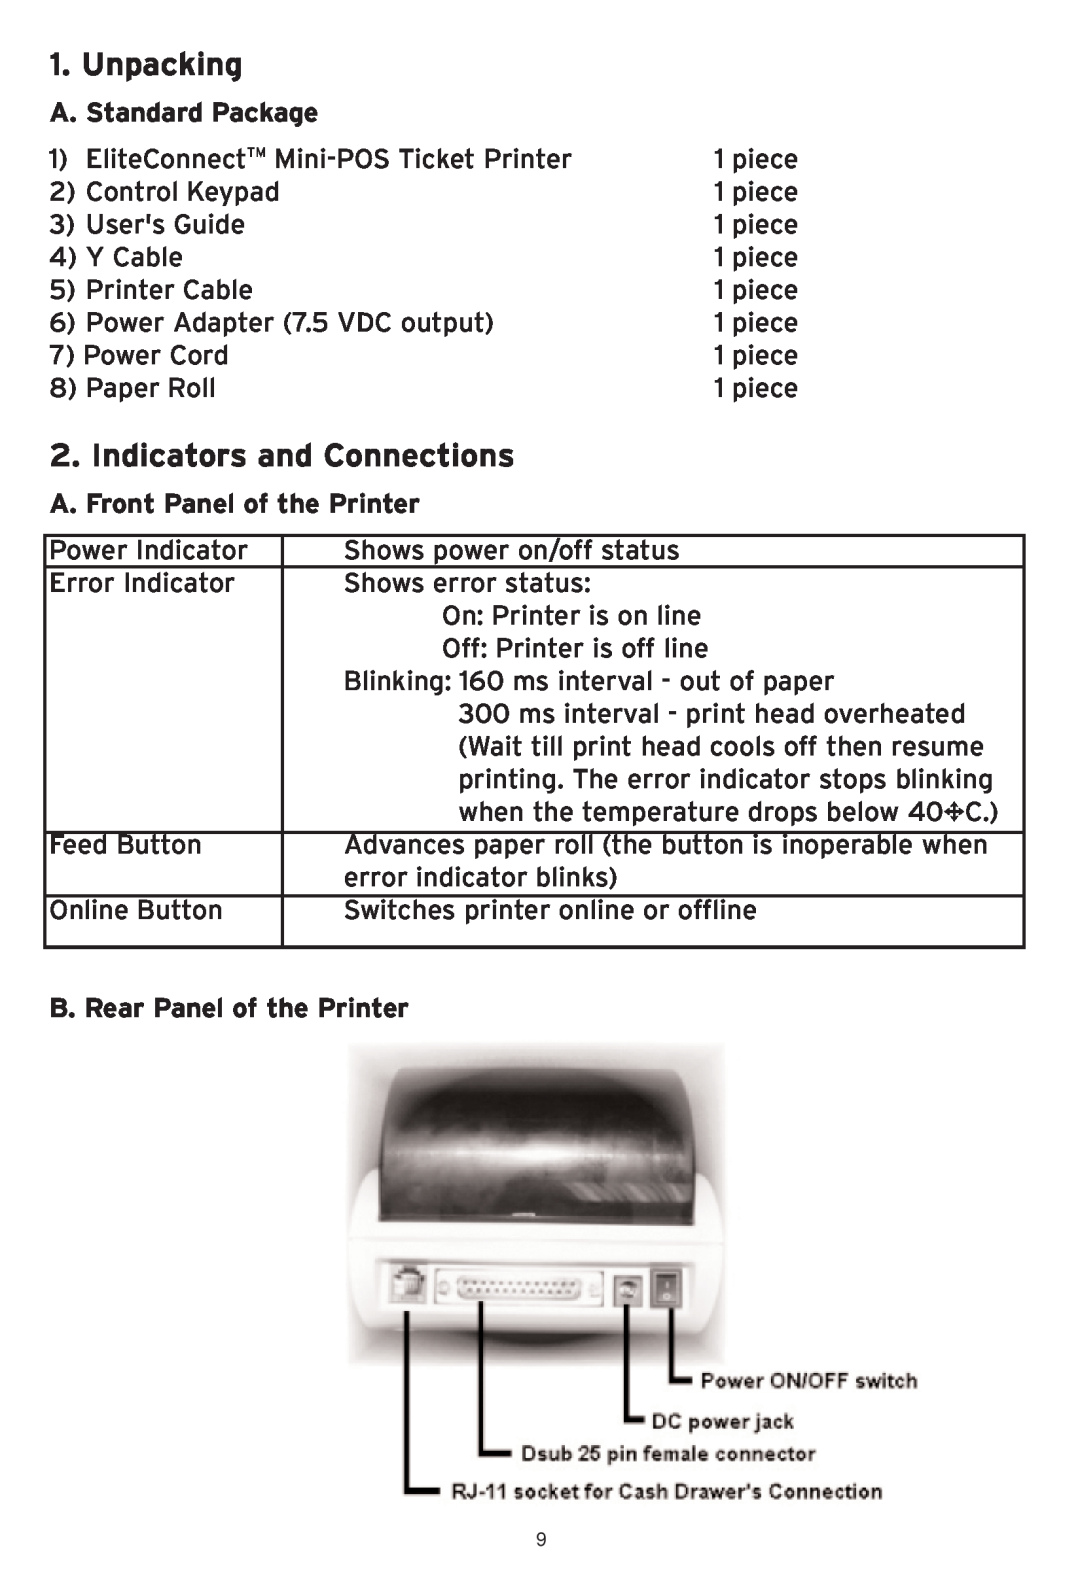 SMC Networks SMCWHS-POS manual Unpacking, Indicators and Connections, A. Standard Package, A. Front Panel of the Printer 